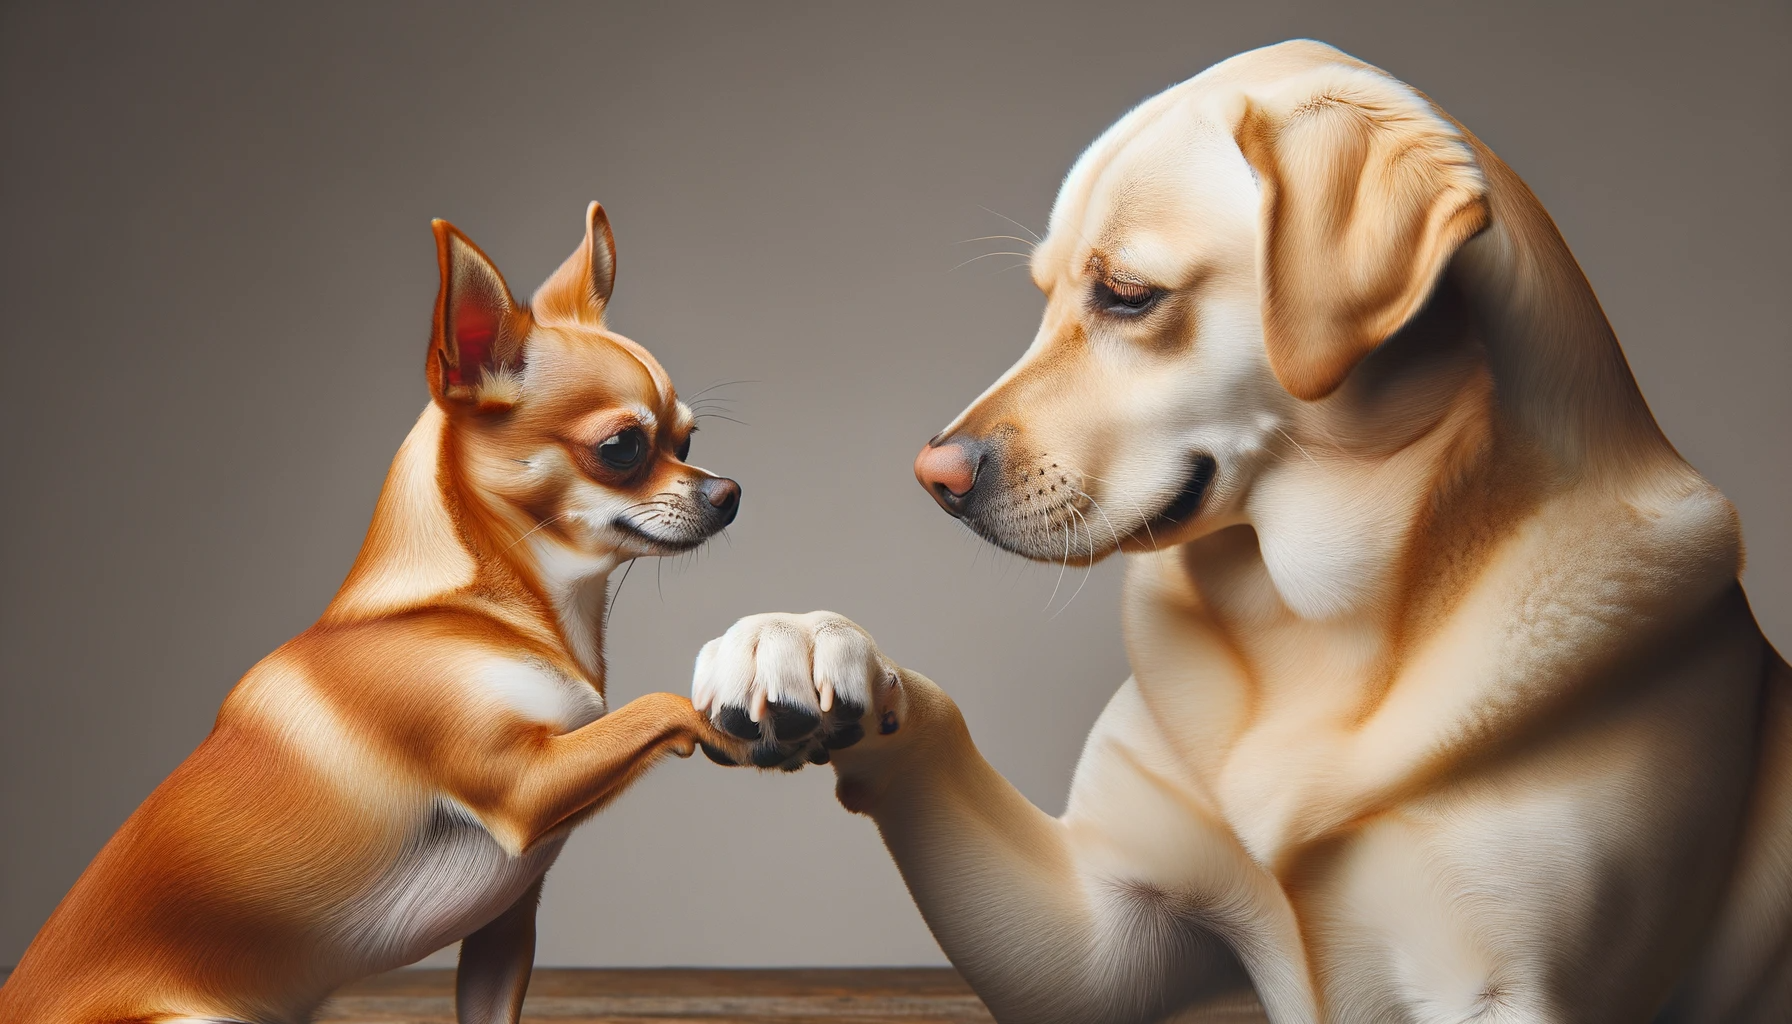 A feisty Chihuahua and a laid-back Labrador Retriever paw-bumping as if to say, 'We got this!'